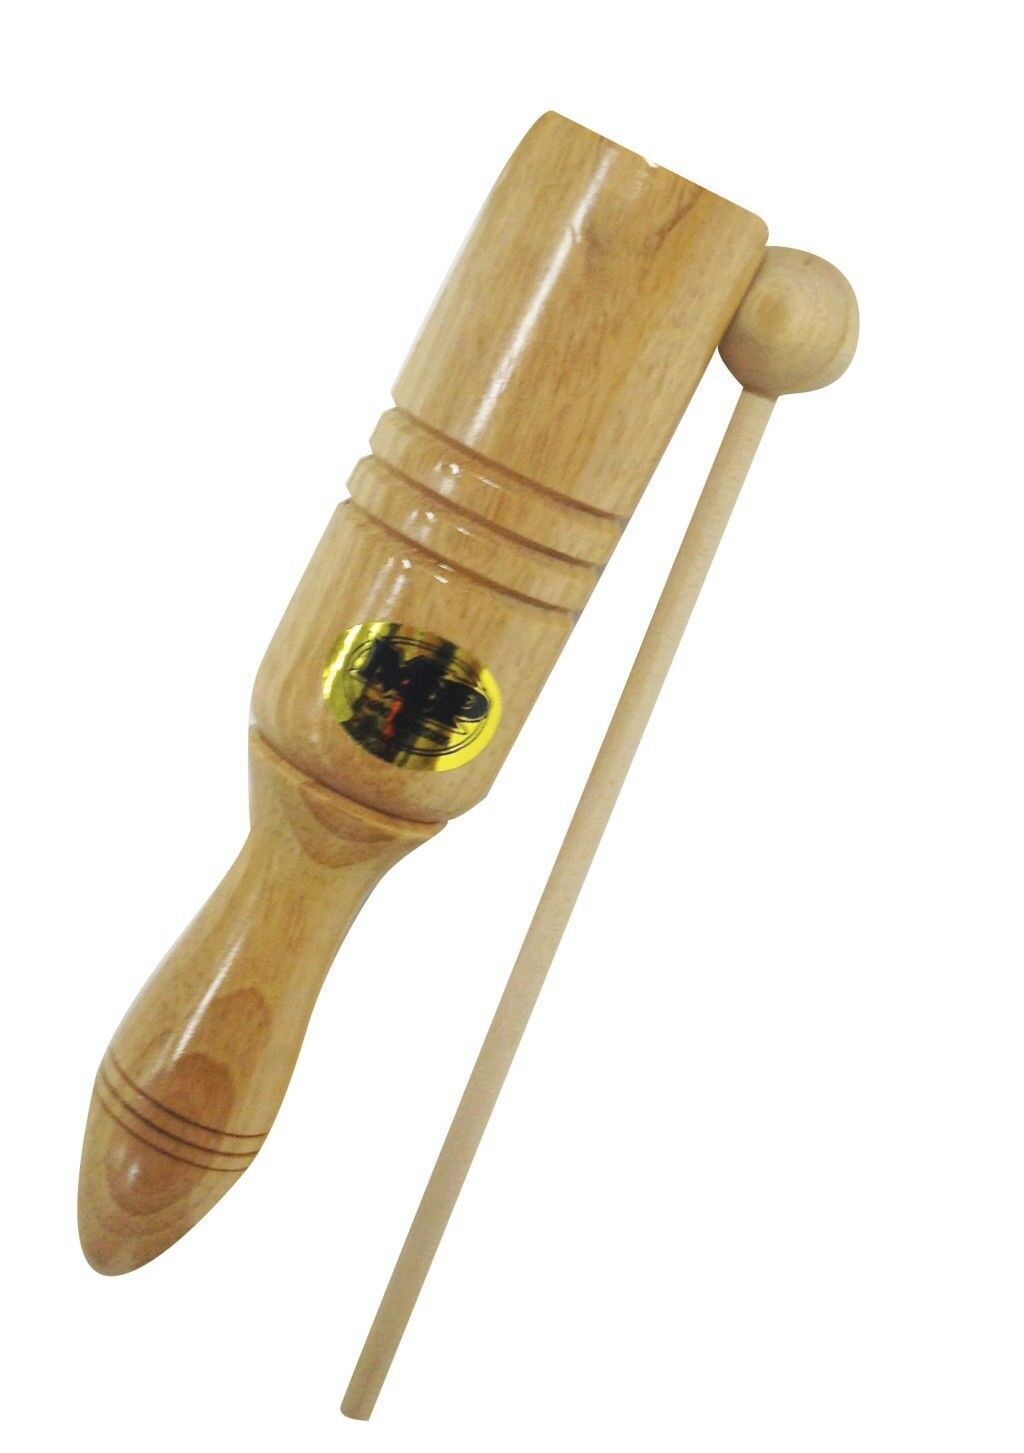 30 x MANO PERCUSSION - Single Wooden Tone Block 7 .5" long, Beater Included